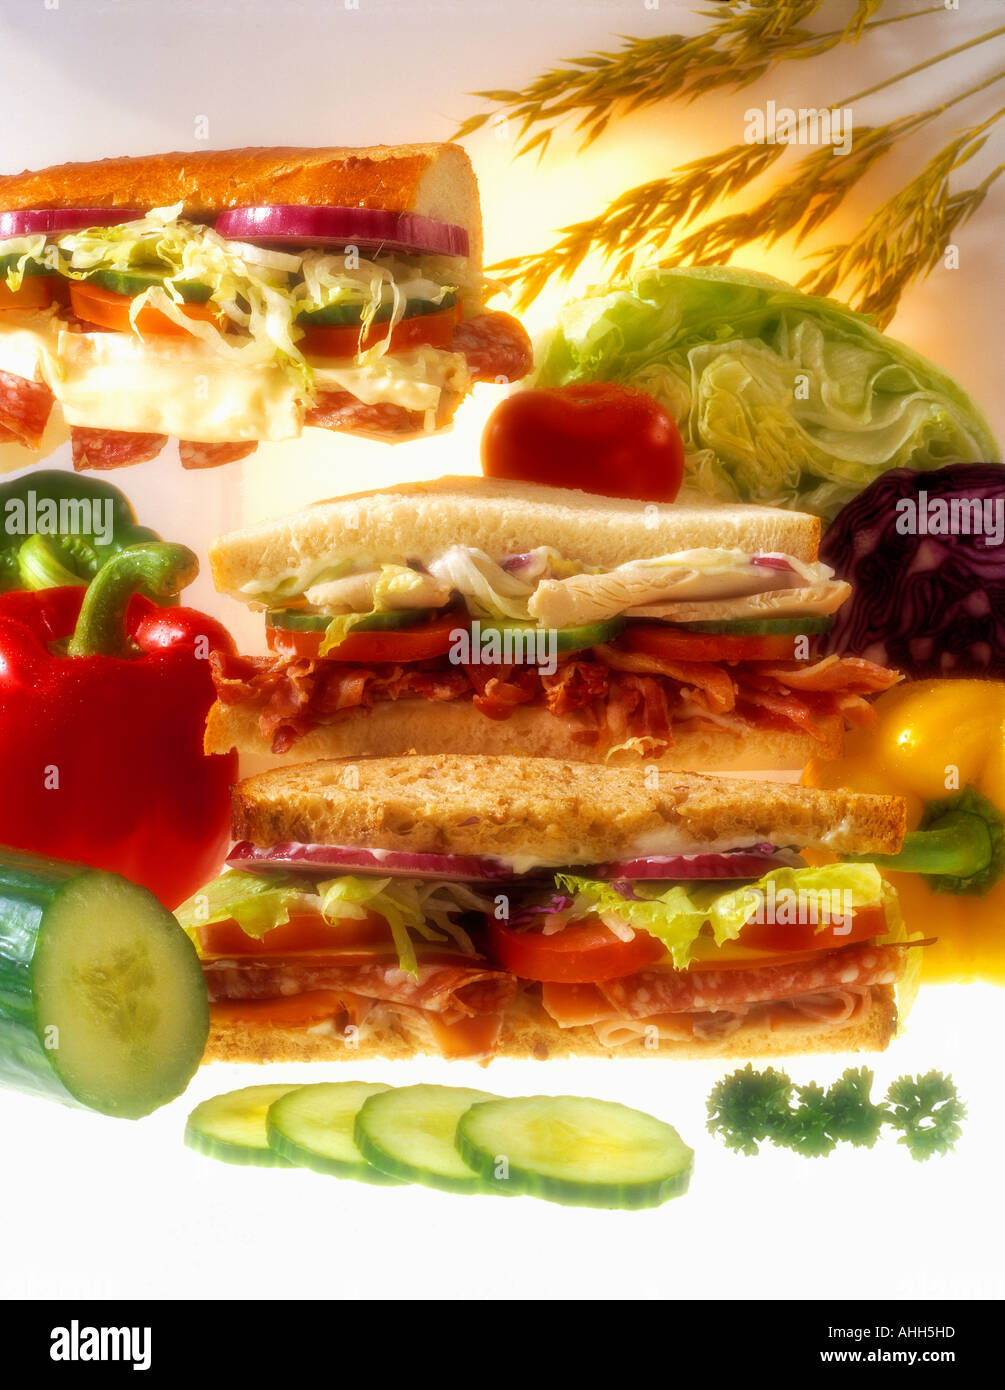 Sandwiches and baguettes freshly made food to go Stock Photo